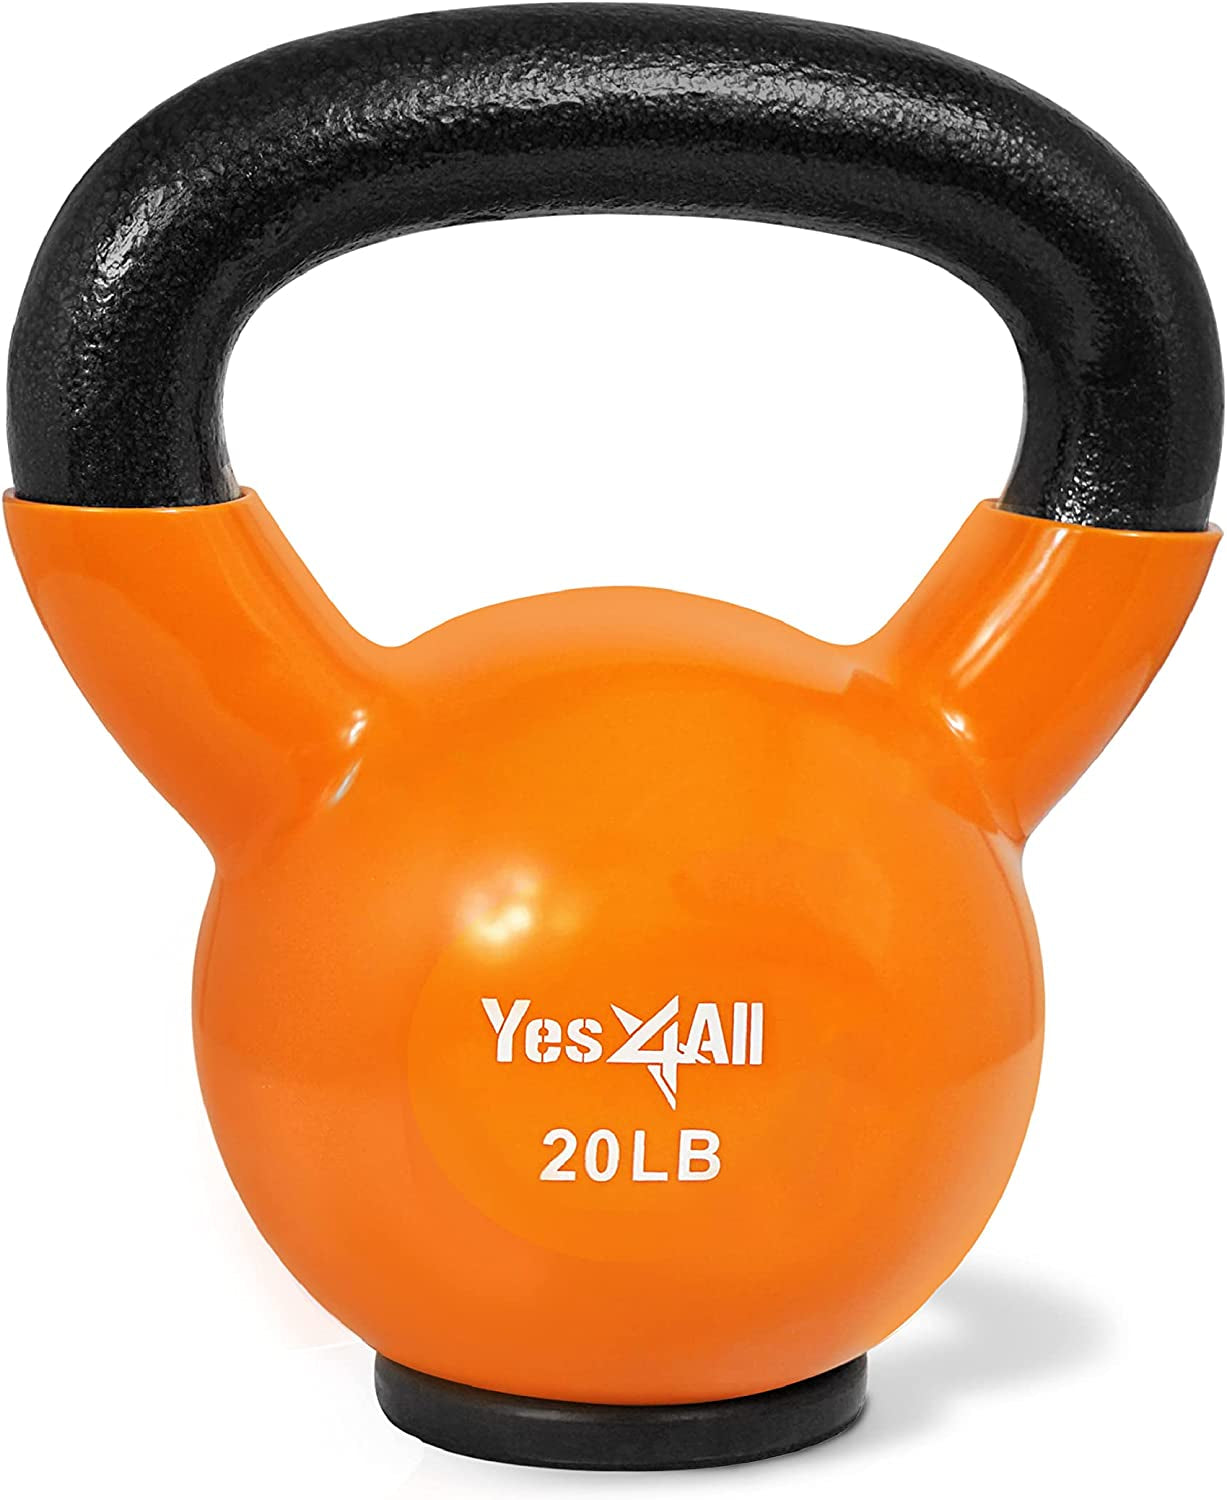 Vinyl Coated Kettlebell with Protective Rubber Base for Weightlifting, Conditioning, Strength & Core Training